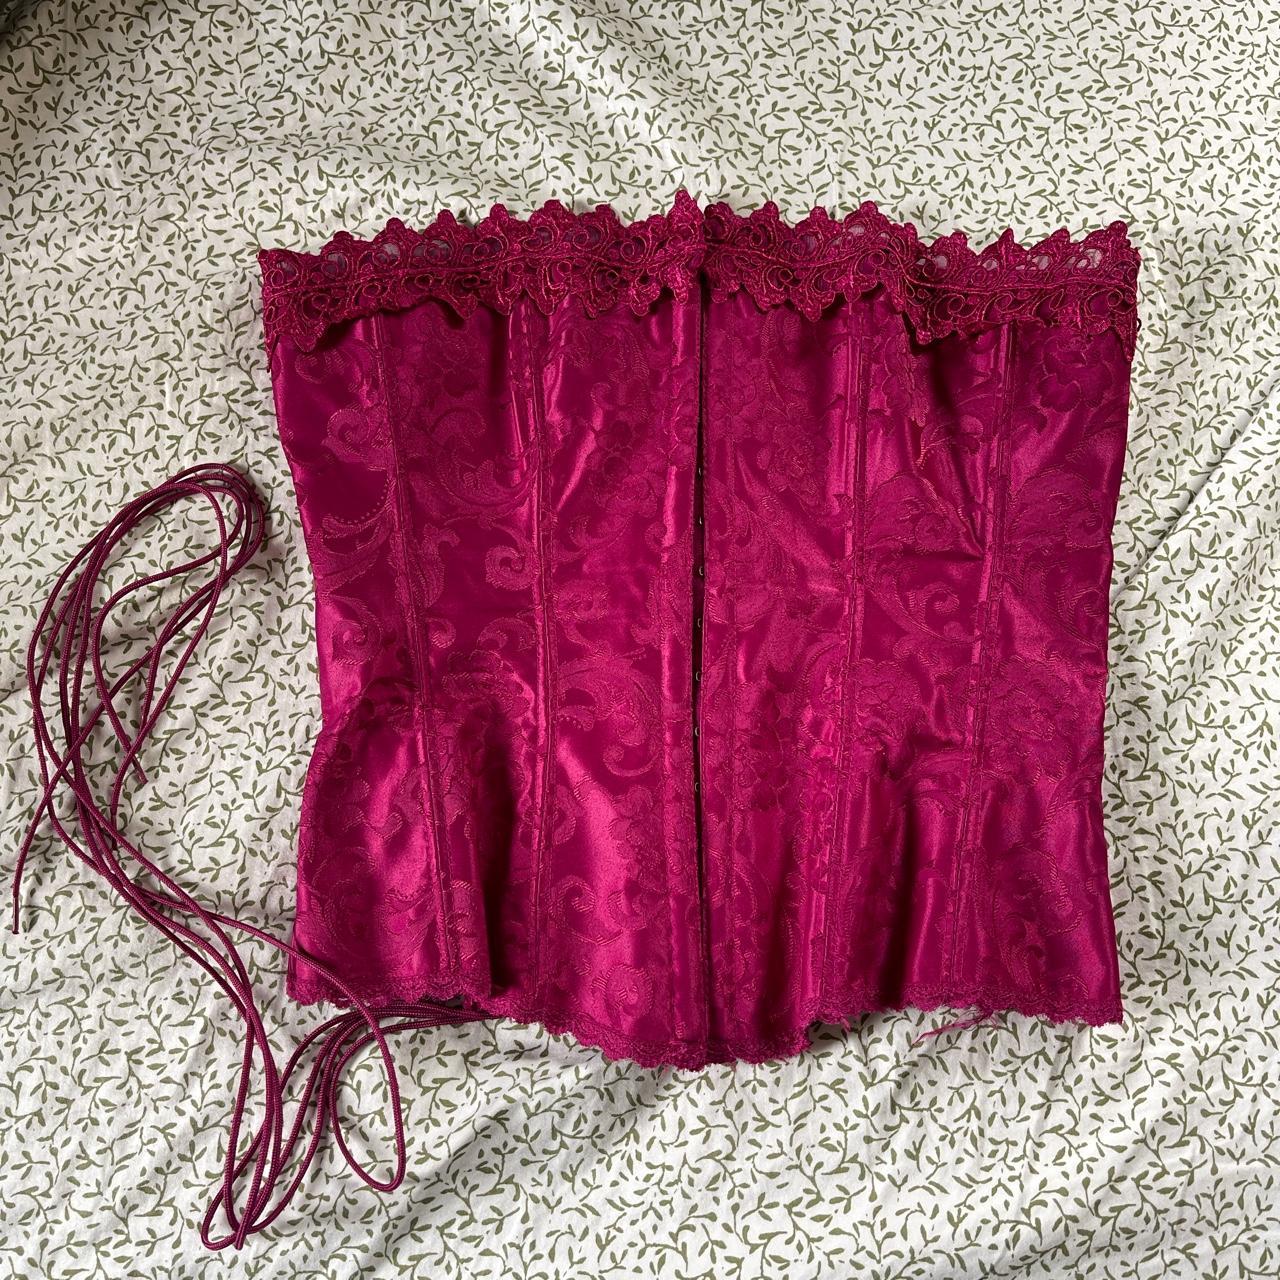 Frederick's of Hollywood Women's Pink Corset | Depop